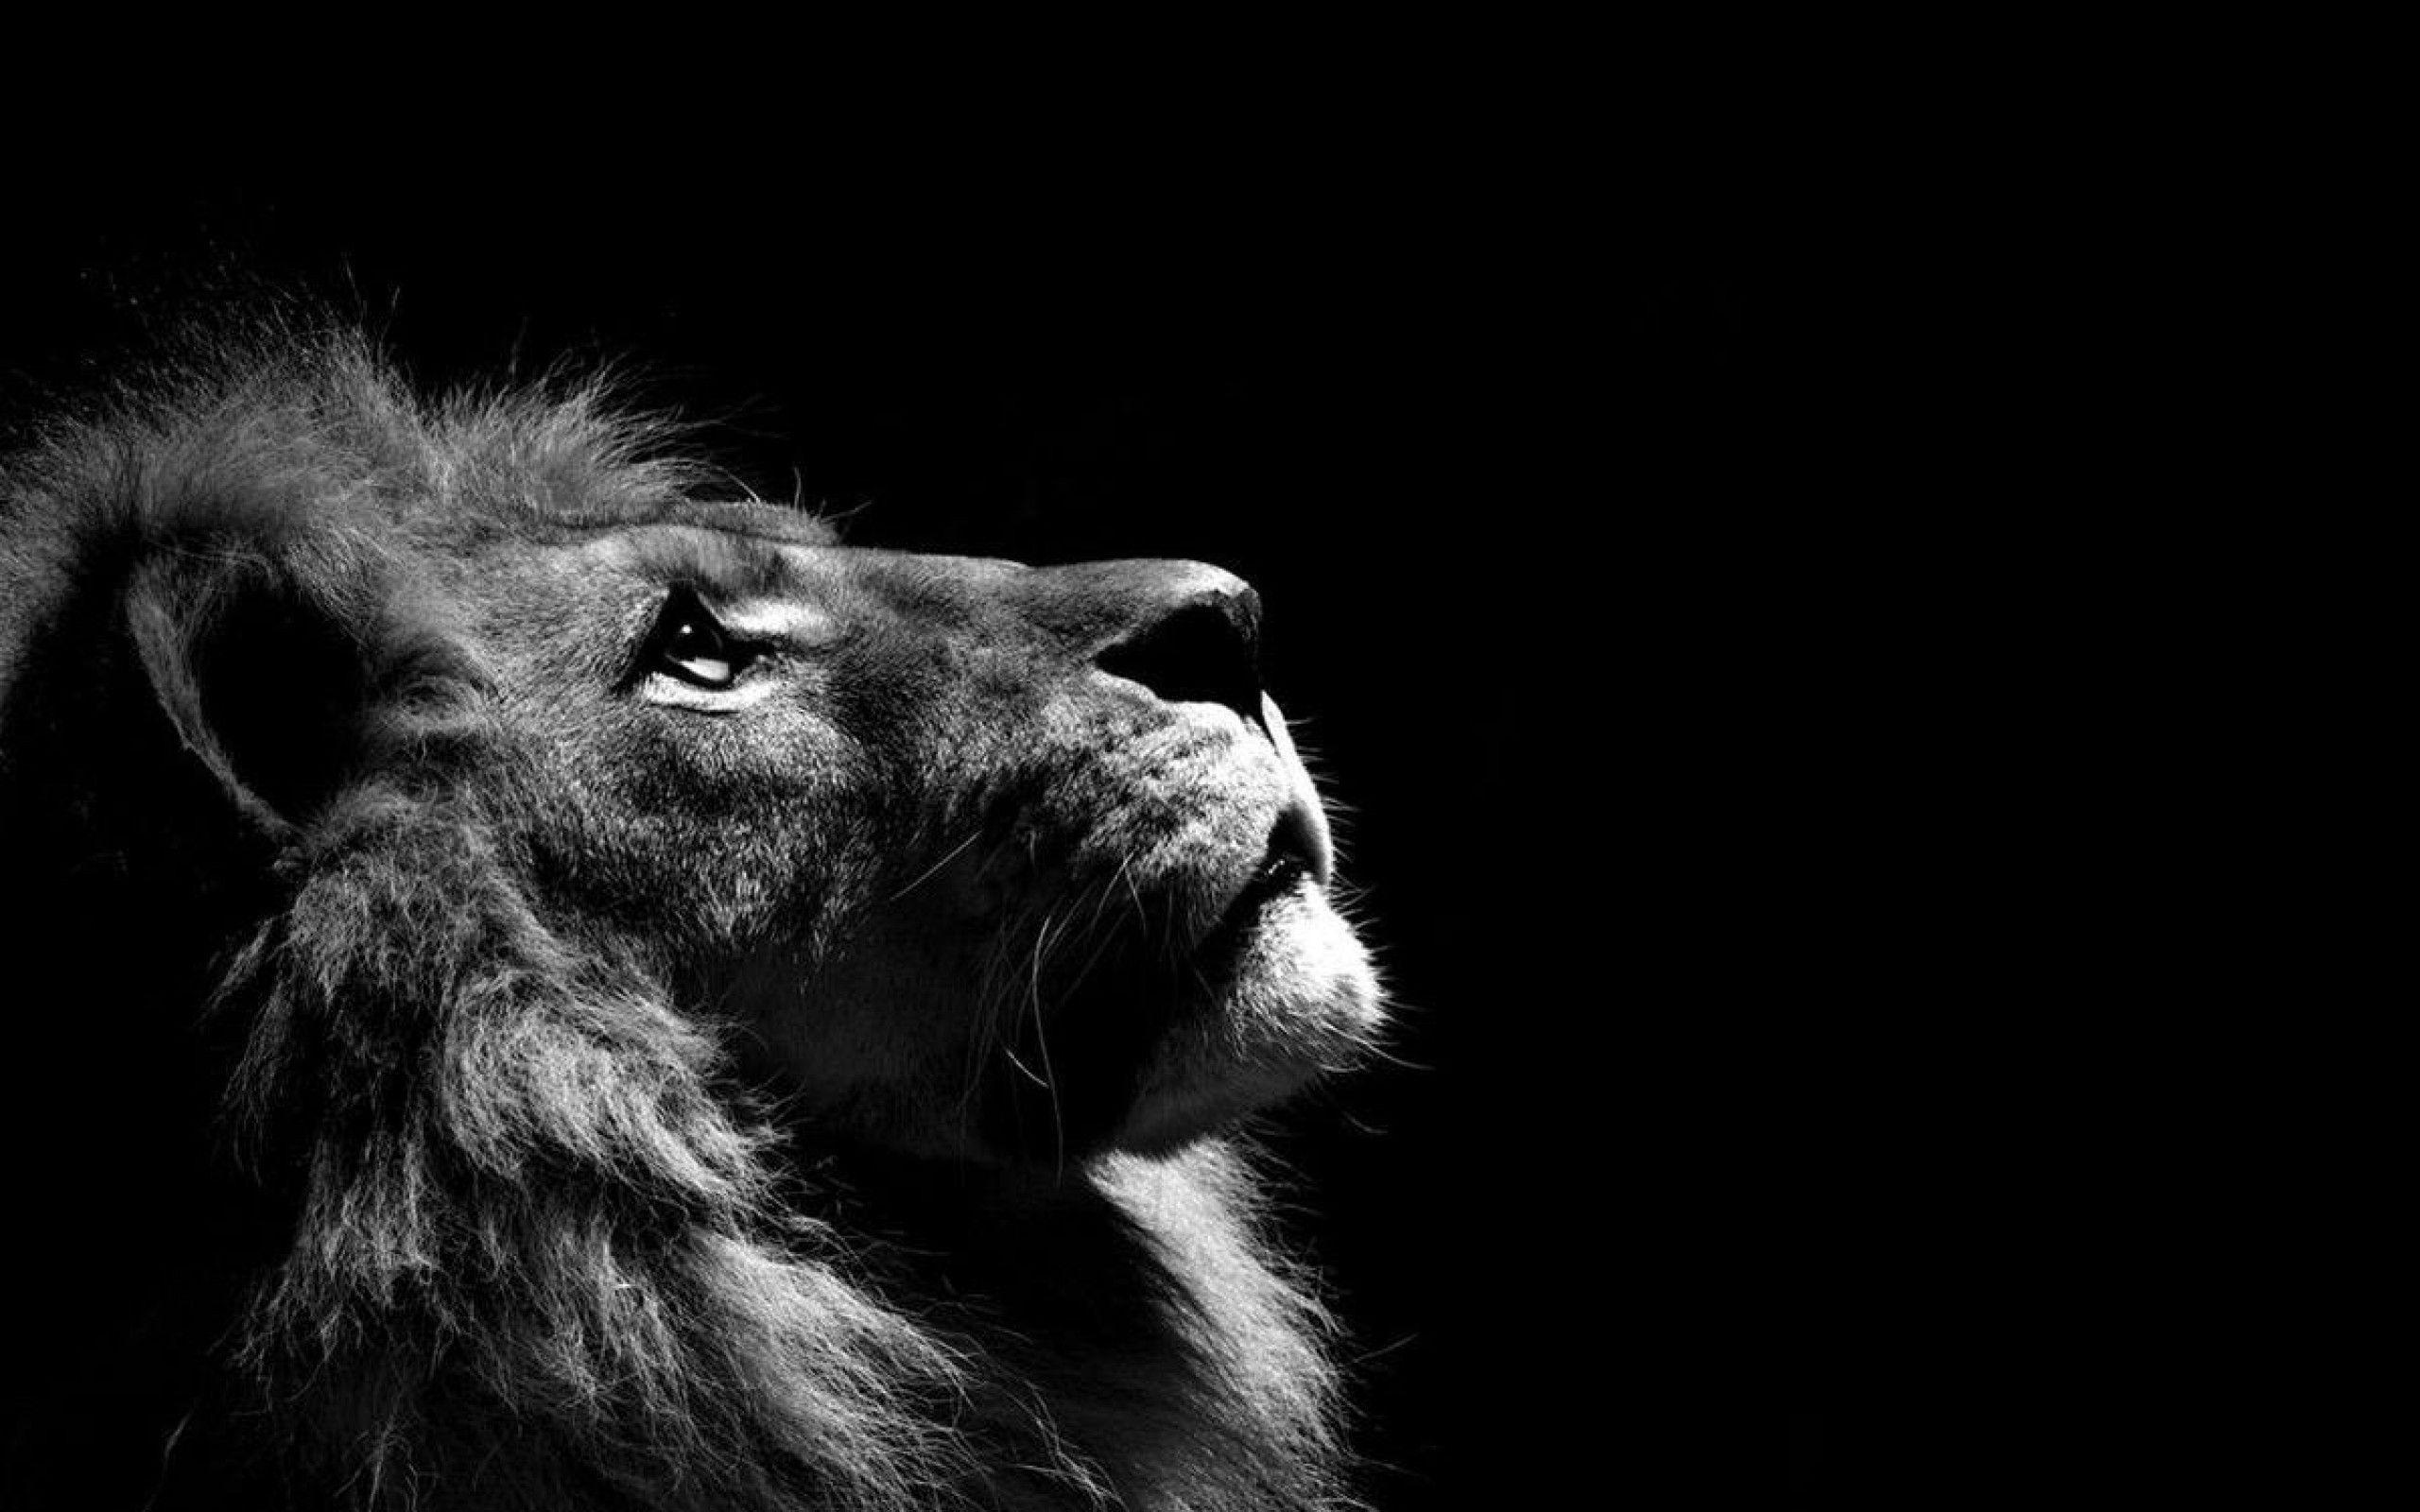 Lion Wallpaper, Download picture of a nice lion image hd